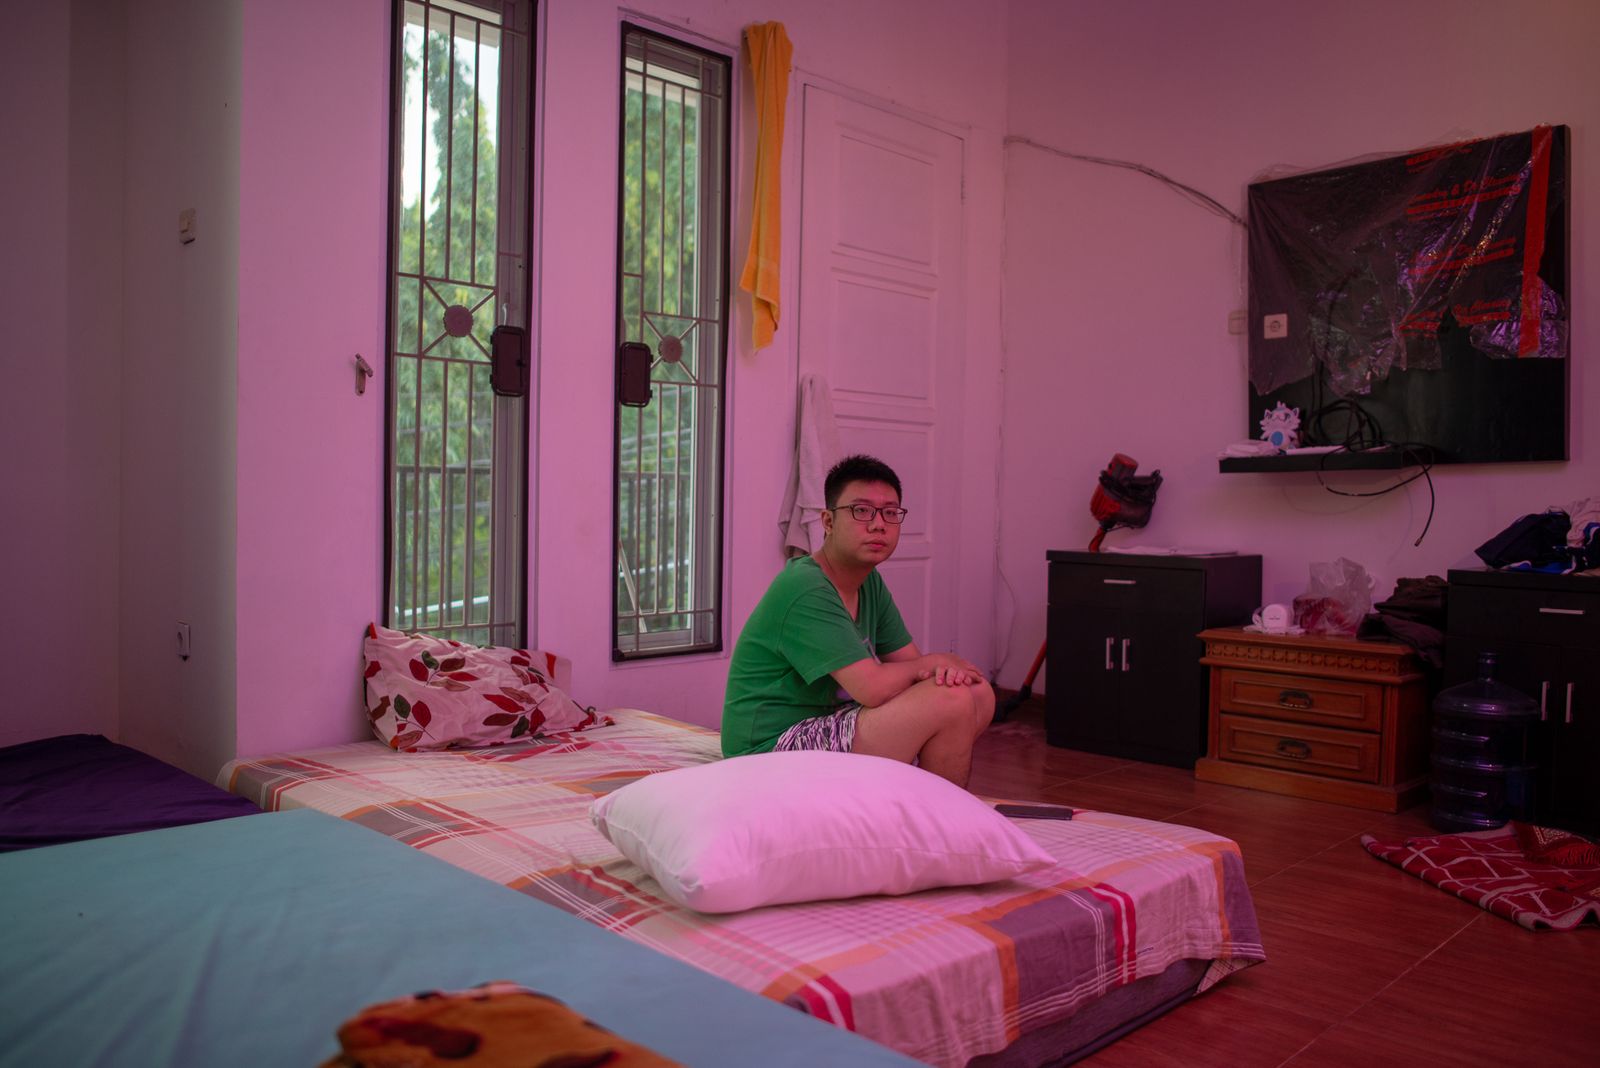 © Hafitz Maulana - While at the Bootcamp, Hartanto and his fellow e-sports athletes shared a bedroom in a house rented out by their club.